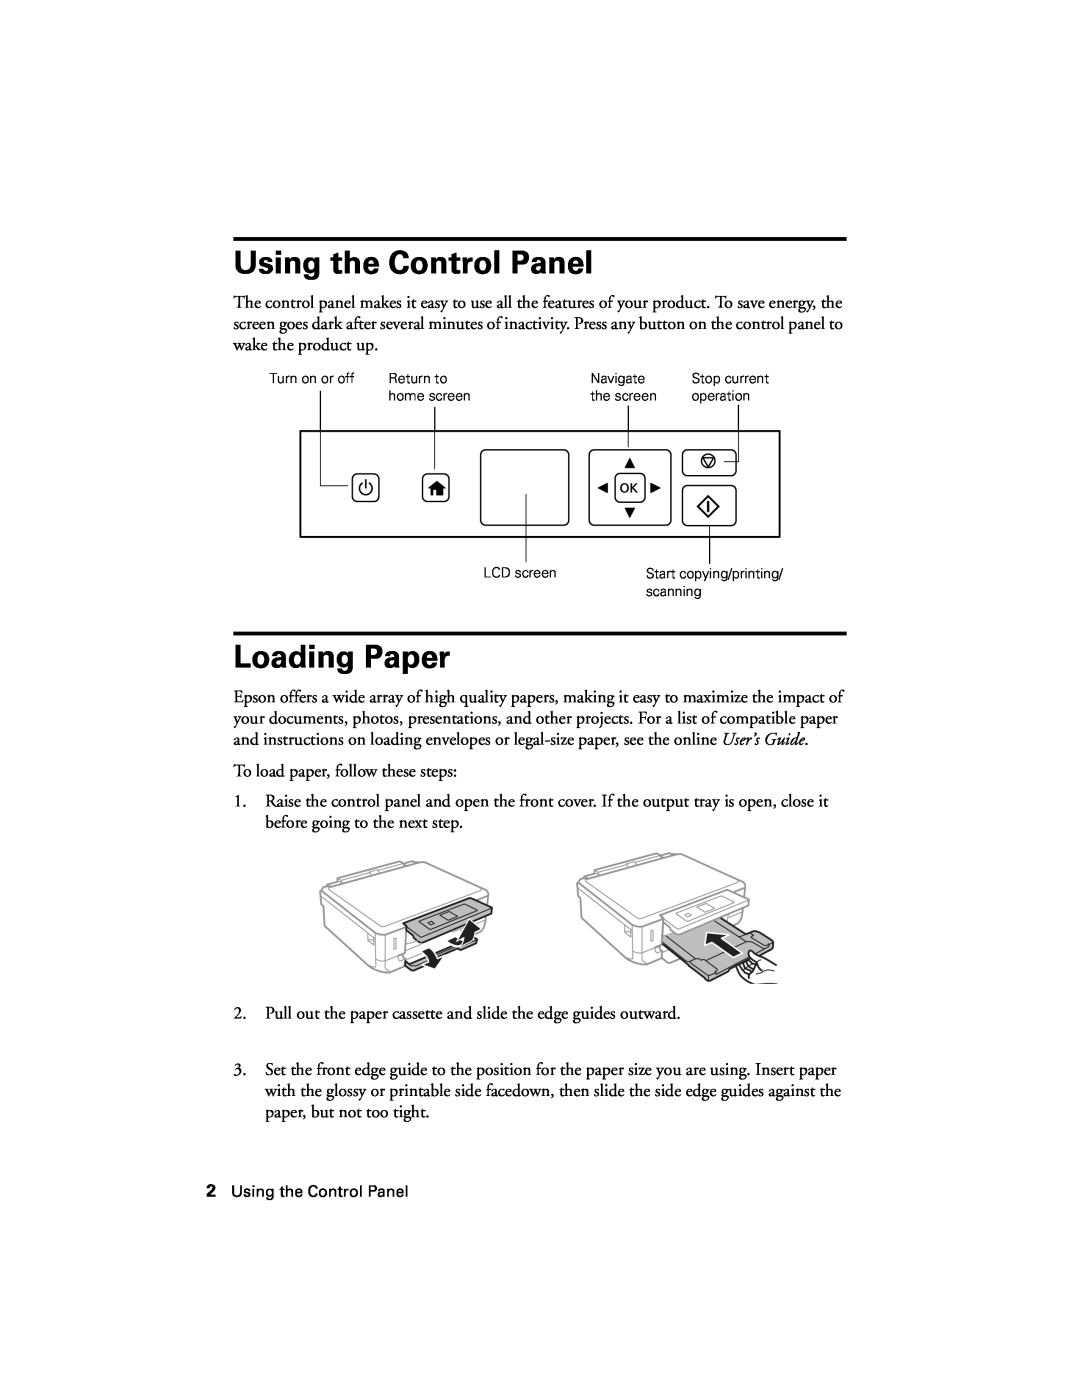 Epson XP-520 manual Using the Control Panel, Loading Paper 